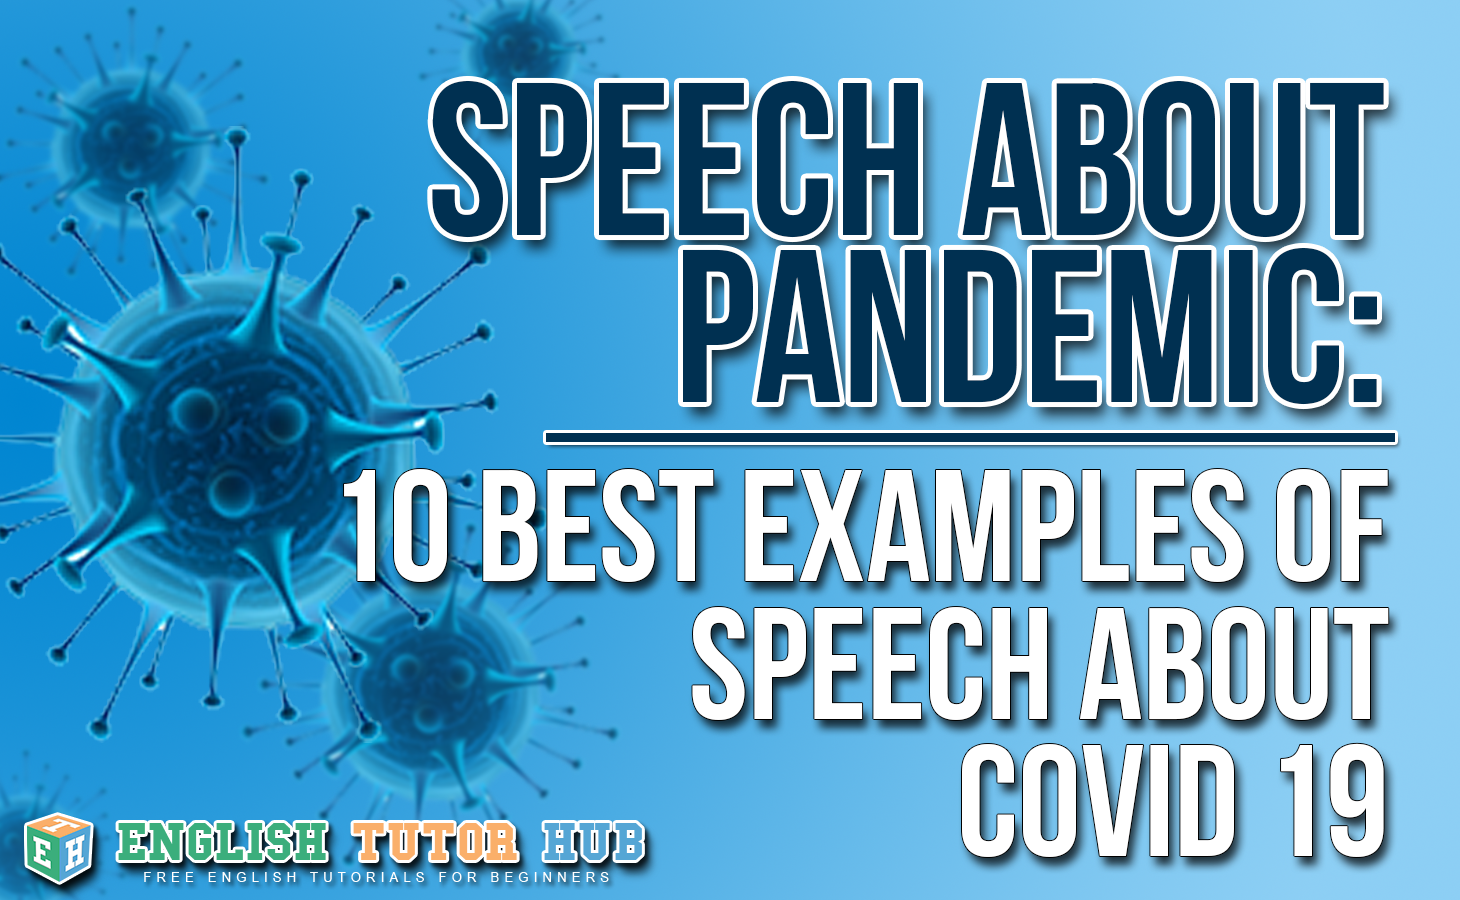 SPEECH ABOUT PANDEMIC - 10 EXAMPLES OF SPEECH ABOUT COVID 19